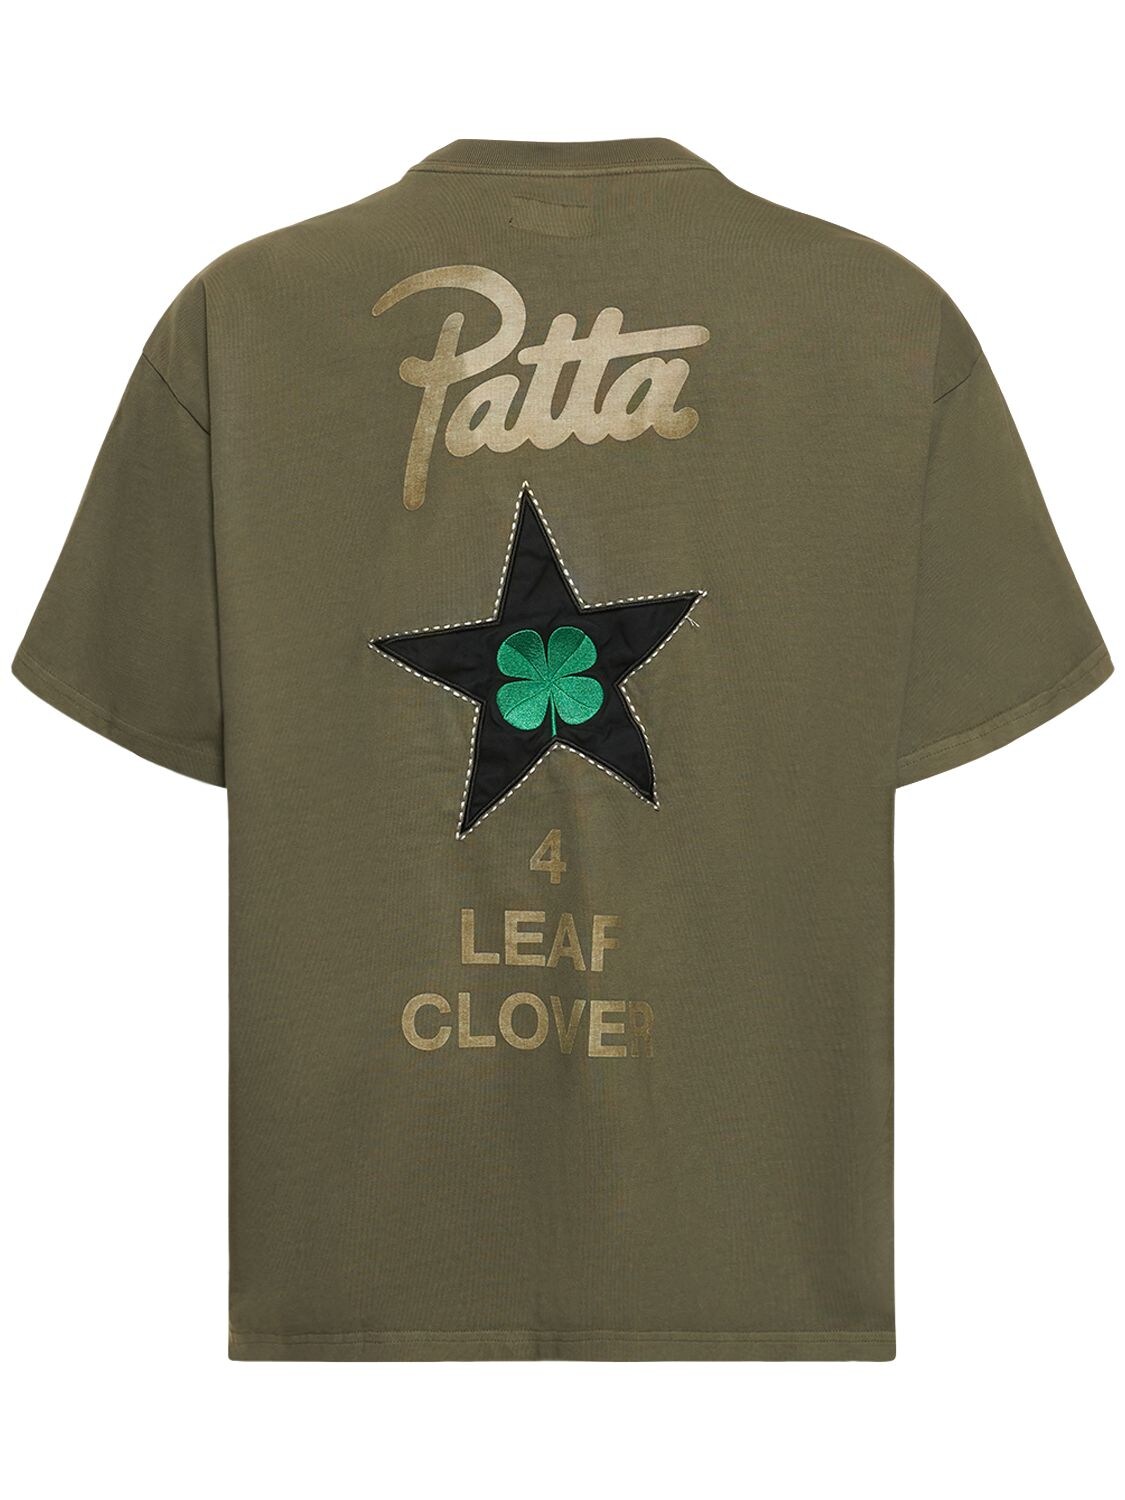 Converse Patta Printed Jersey T-shirt In Olive